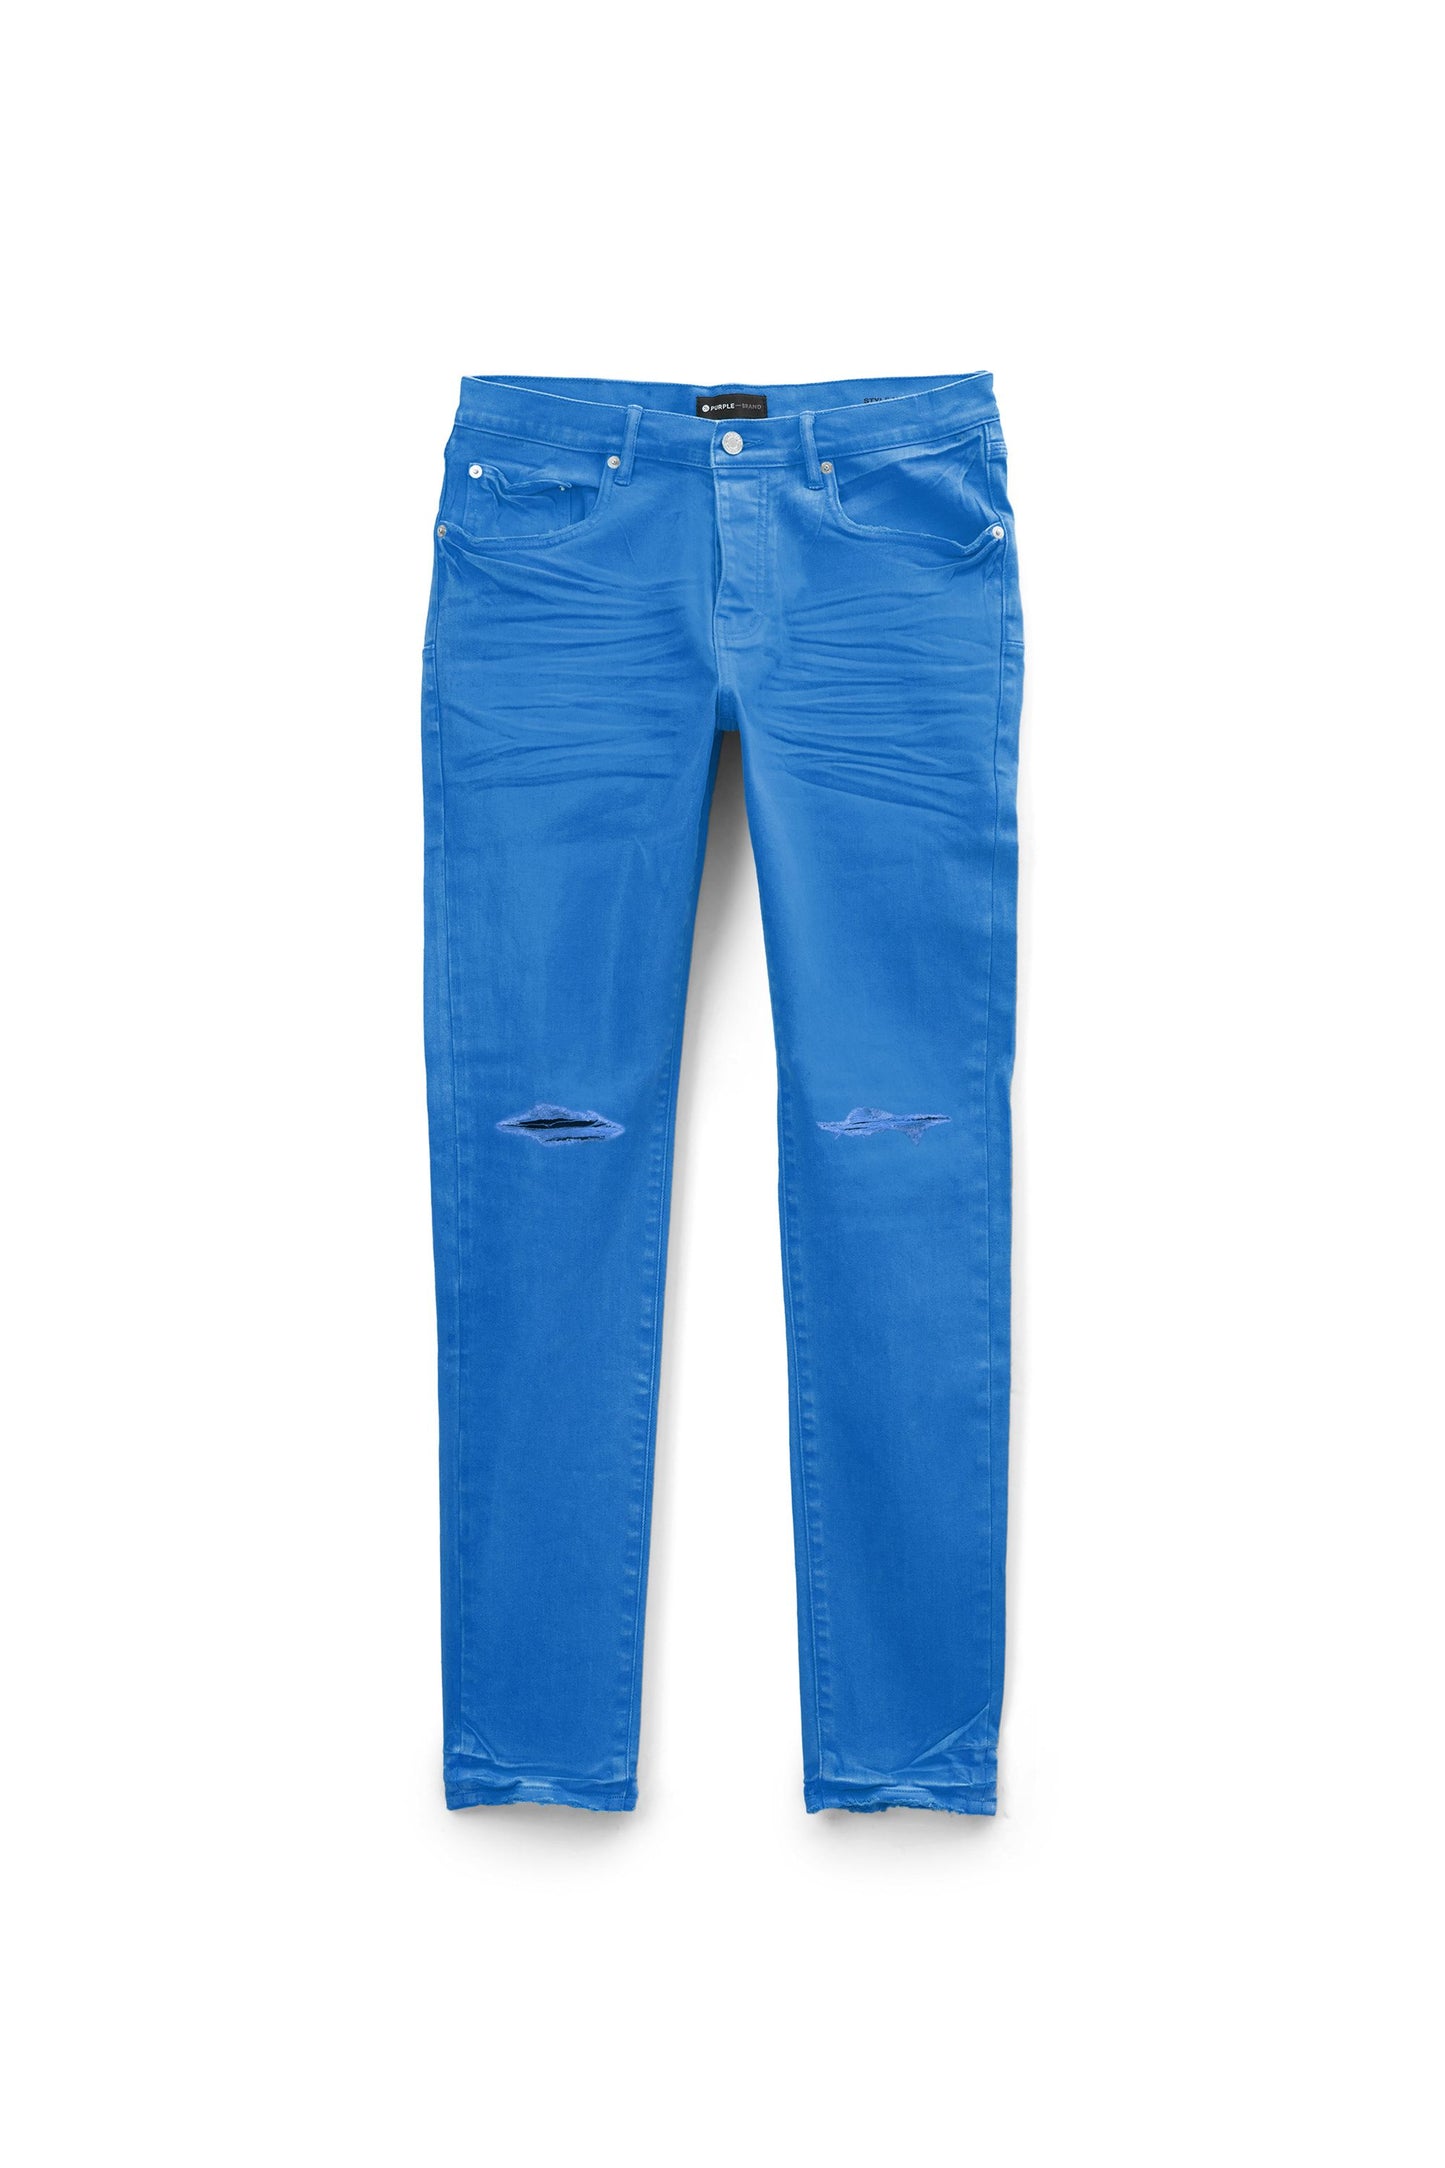 PURPLE BRAND - Men's Denim Jean - Low Rise Skinny - Style No. P001 - Overdyed Blue With Coating - Front